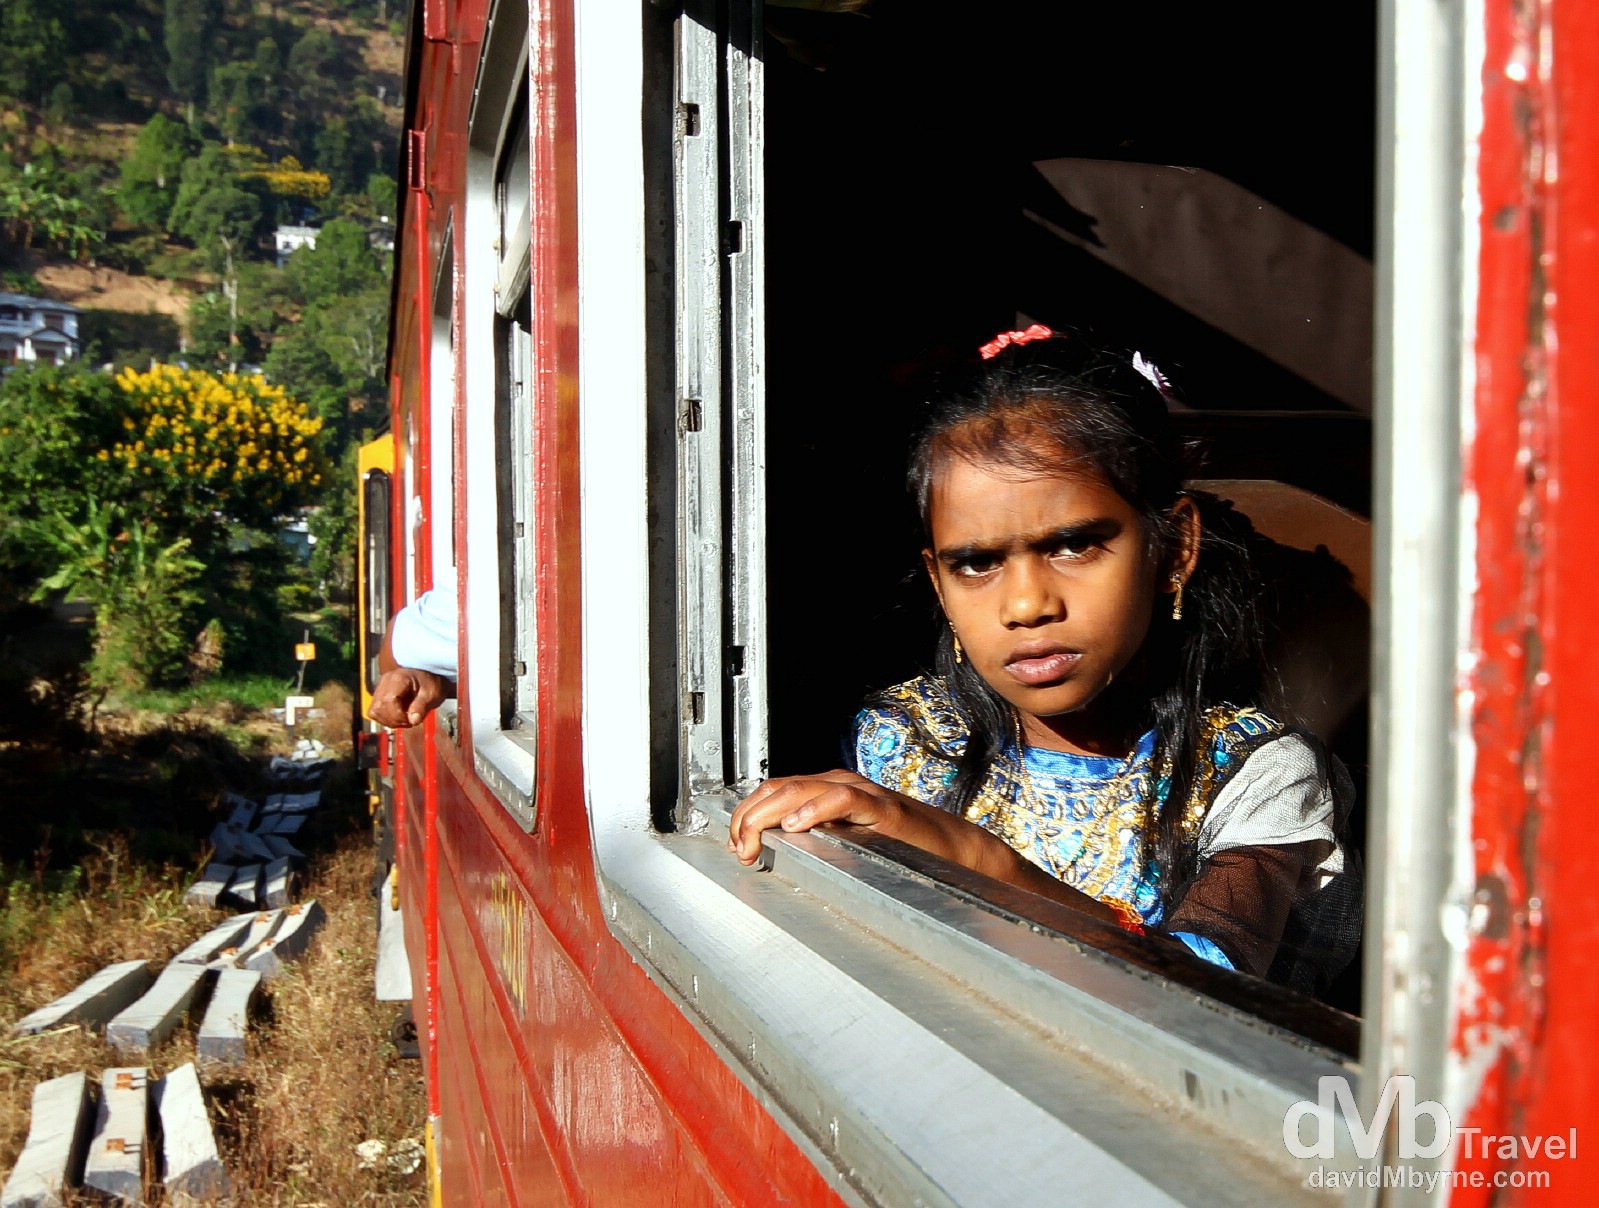 On the Badulla to Colombo train in central Sri Lanka. September 5th 2012.